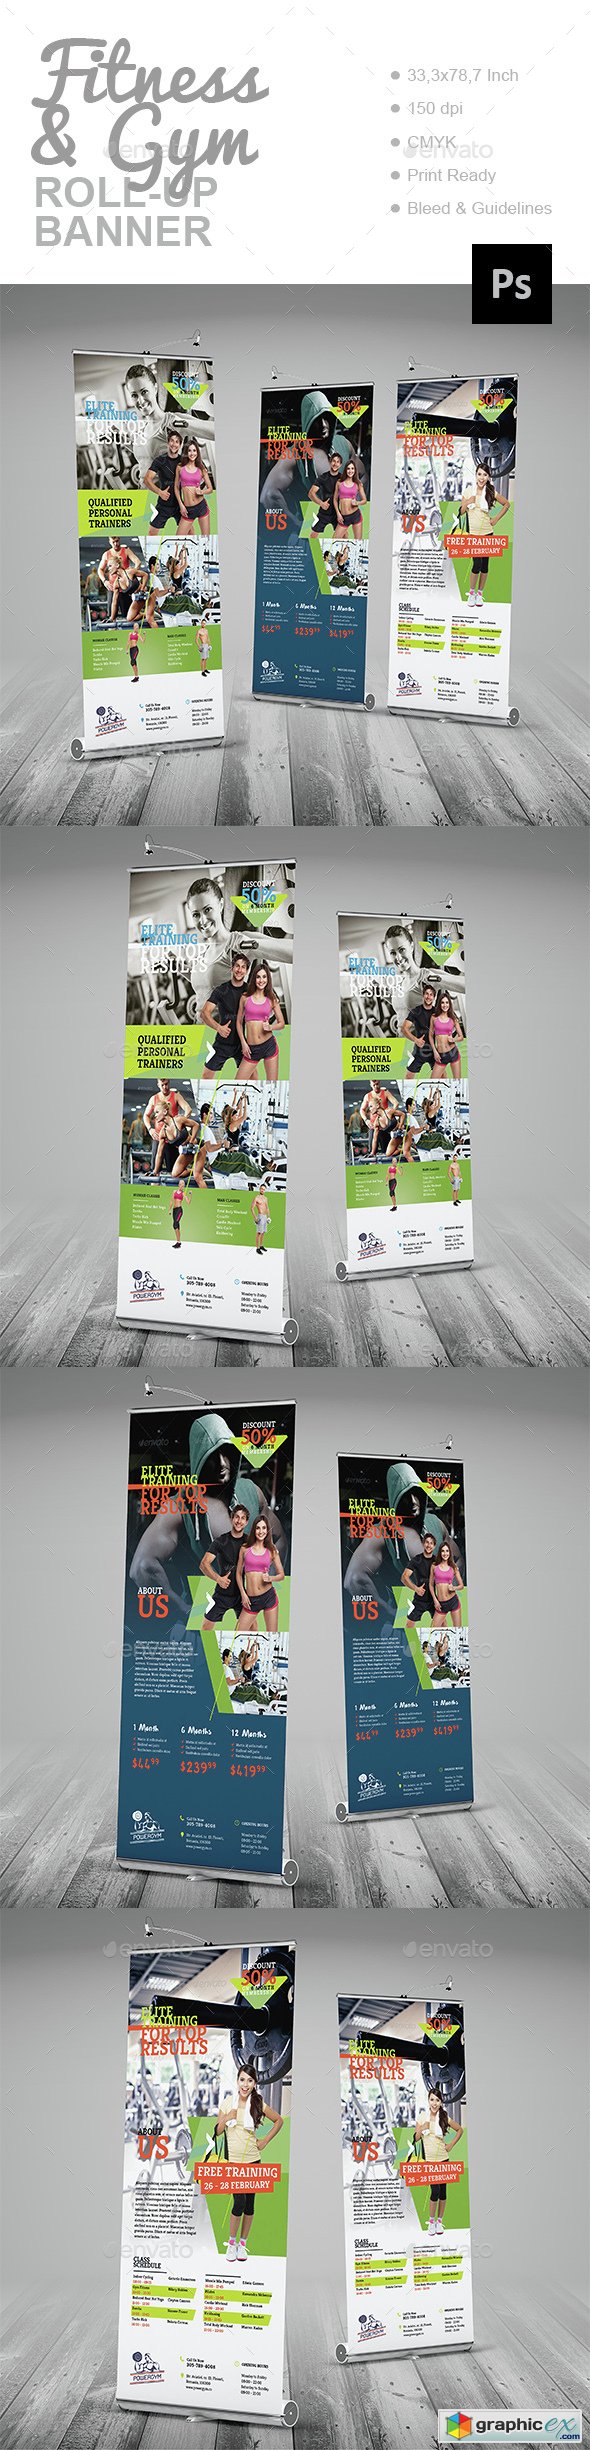 Fitness & Gym Roll-Up Banner